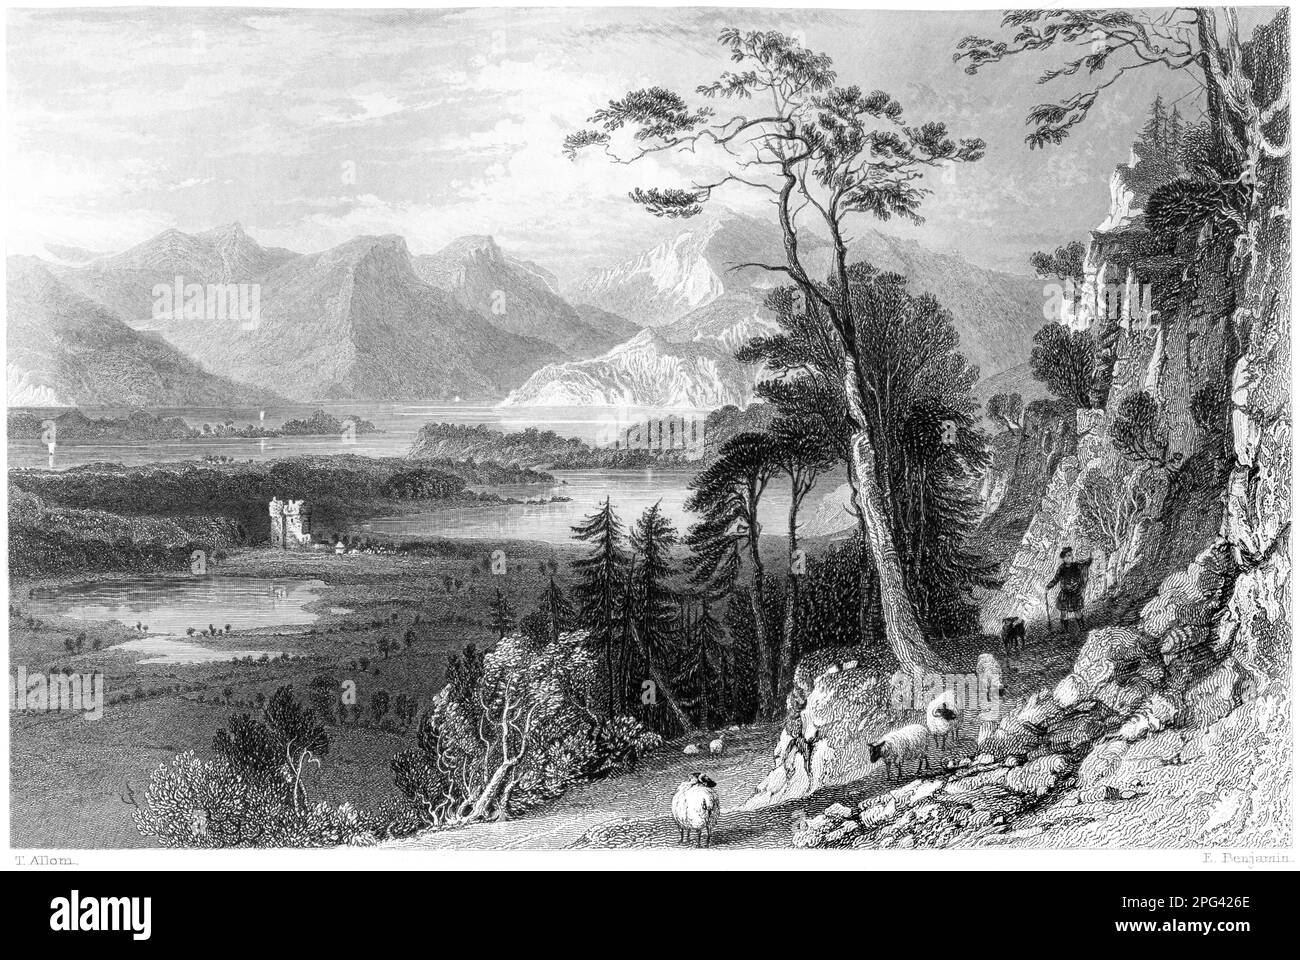 An engraving of Loch Creran with Bercaldine (Barcaldine) Castle, Argyleshire, Scotland UK scanned at high resolution from a book printed in 1840. Stock Photo